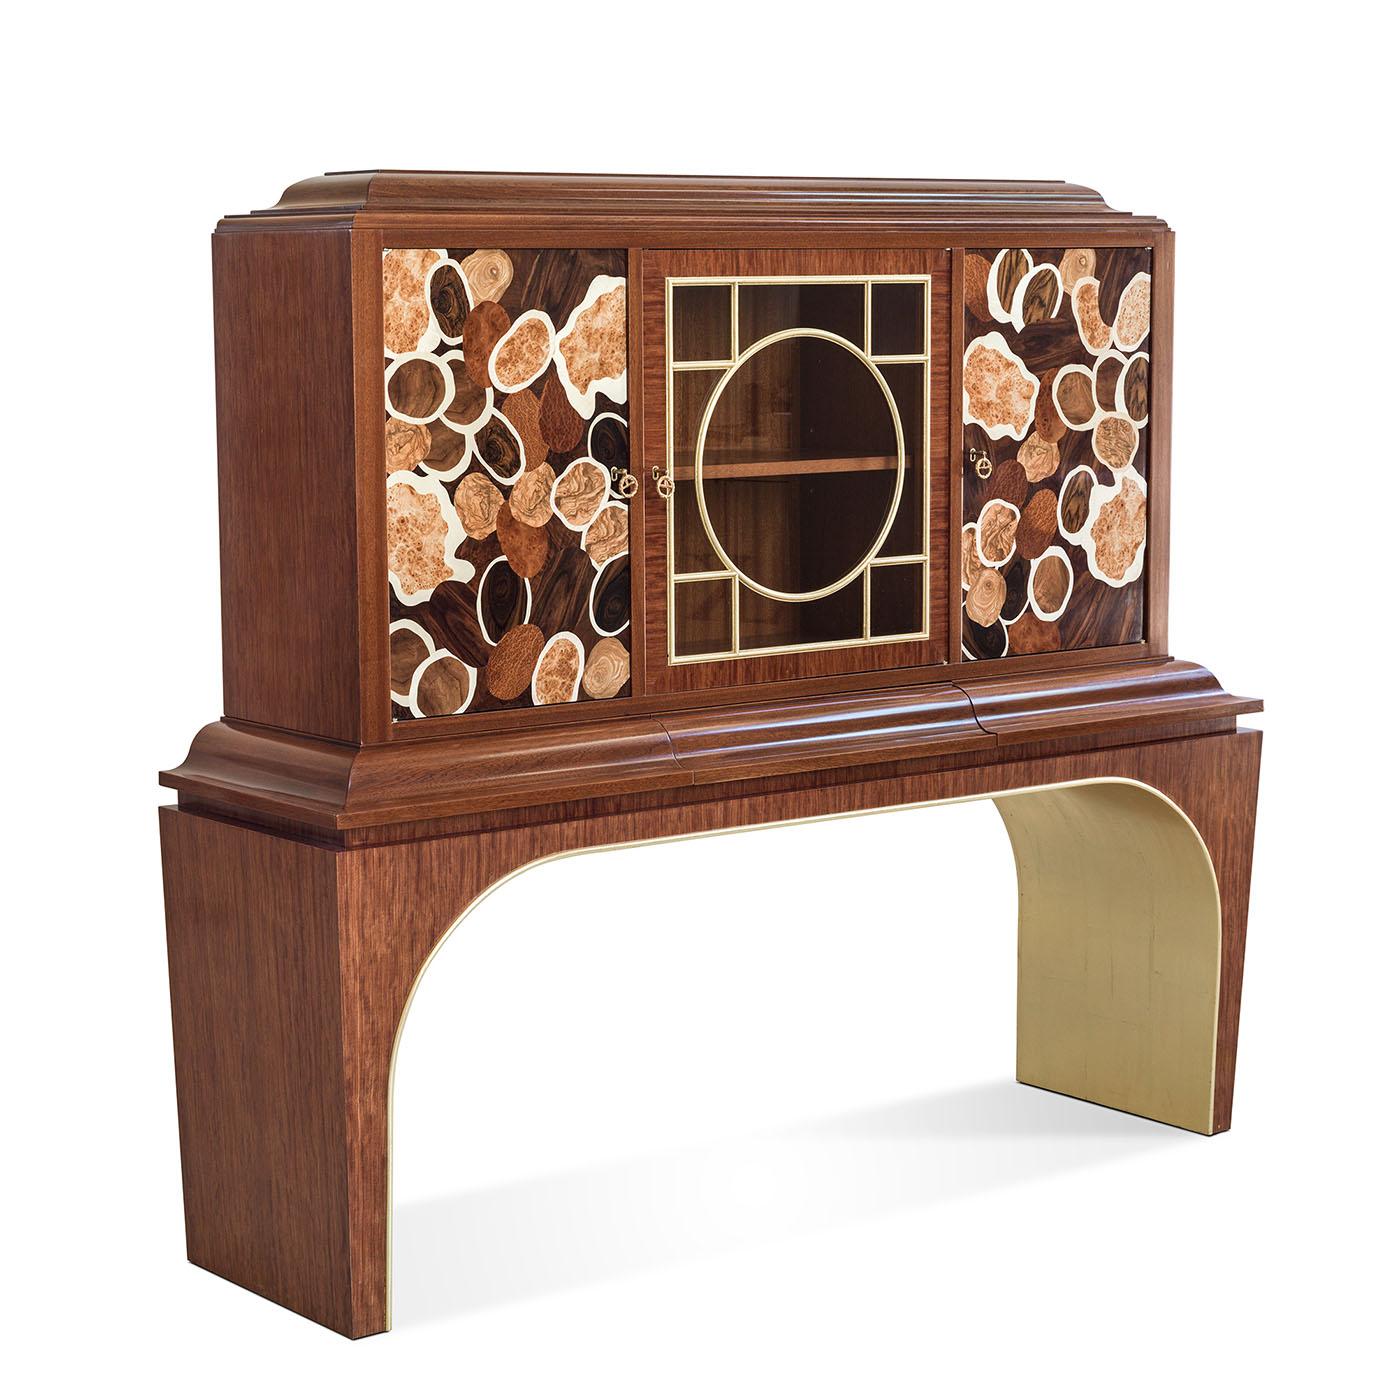 This precious cabinet is expertly crafted from Mahogany and Bubinga wood and it featured intricately inlaid doors and elegant brass details.